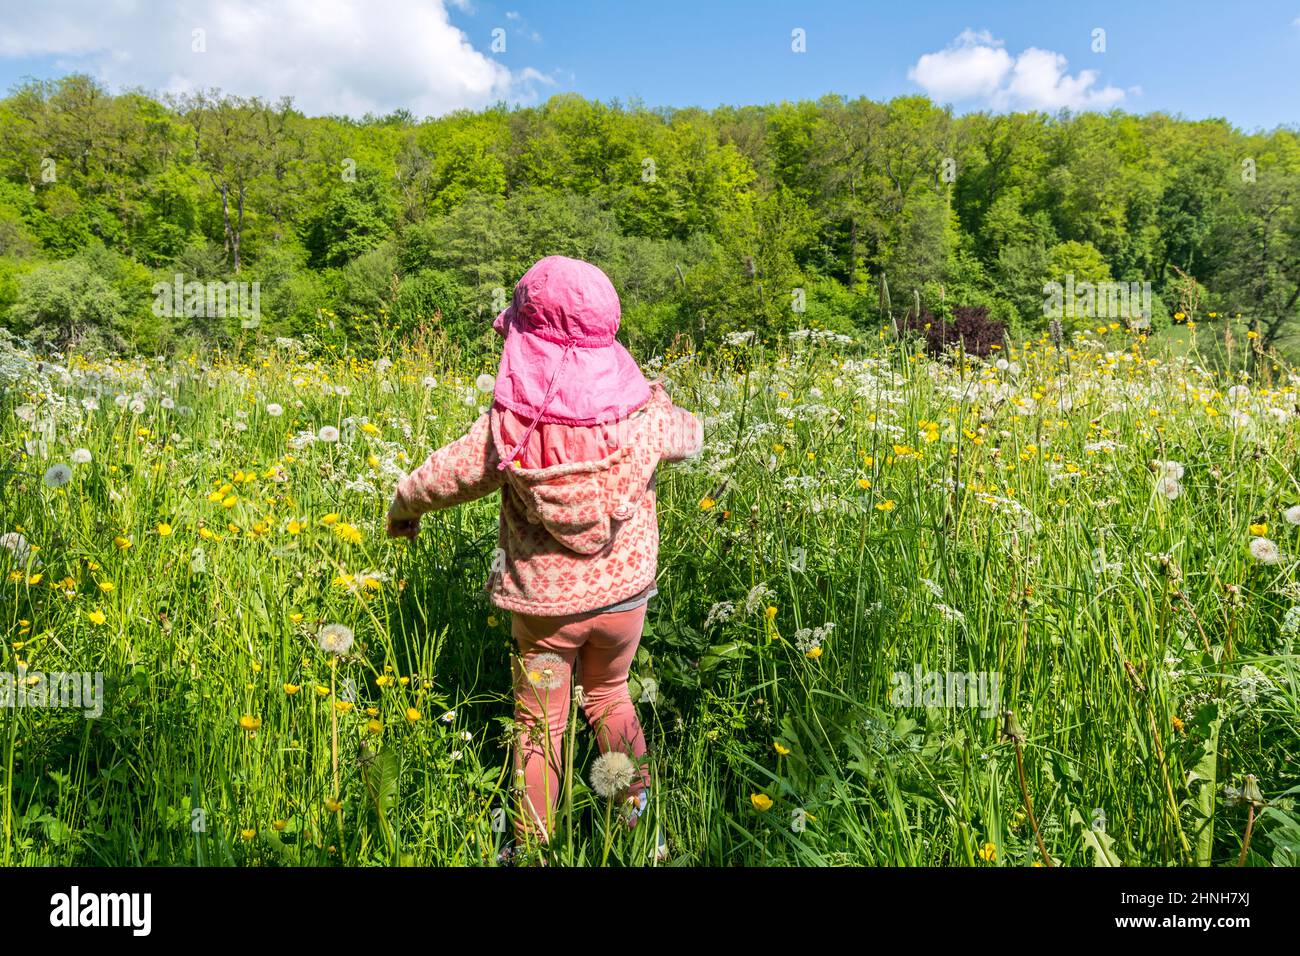 Young happy child walking through flower meadow in spring on a sunny day Stock Photo